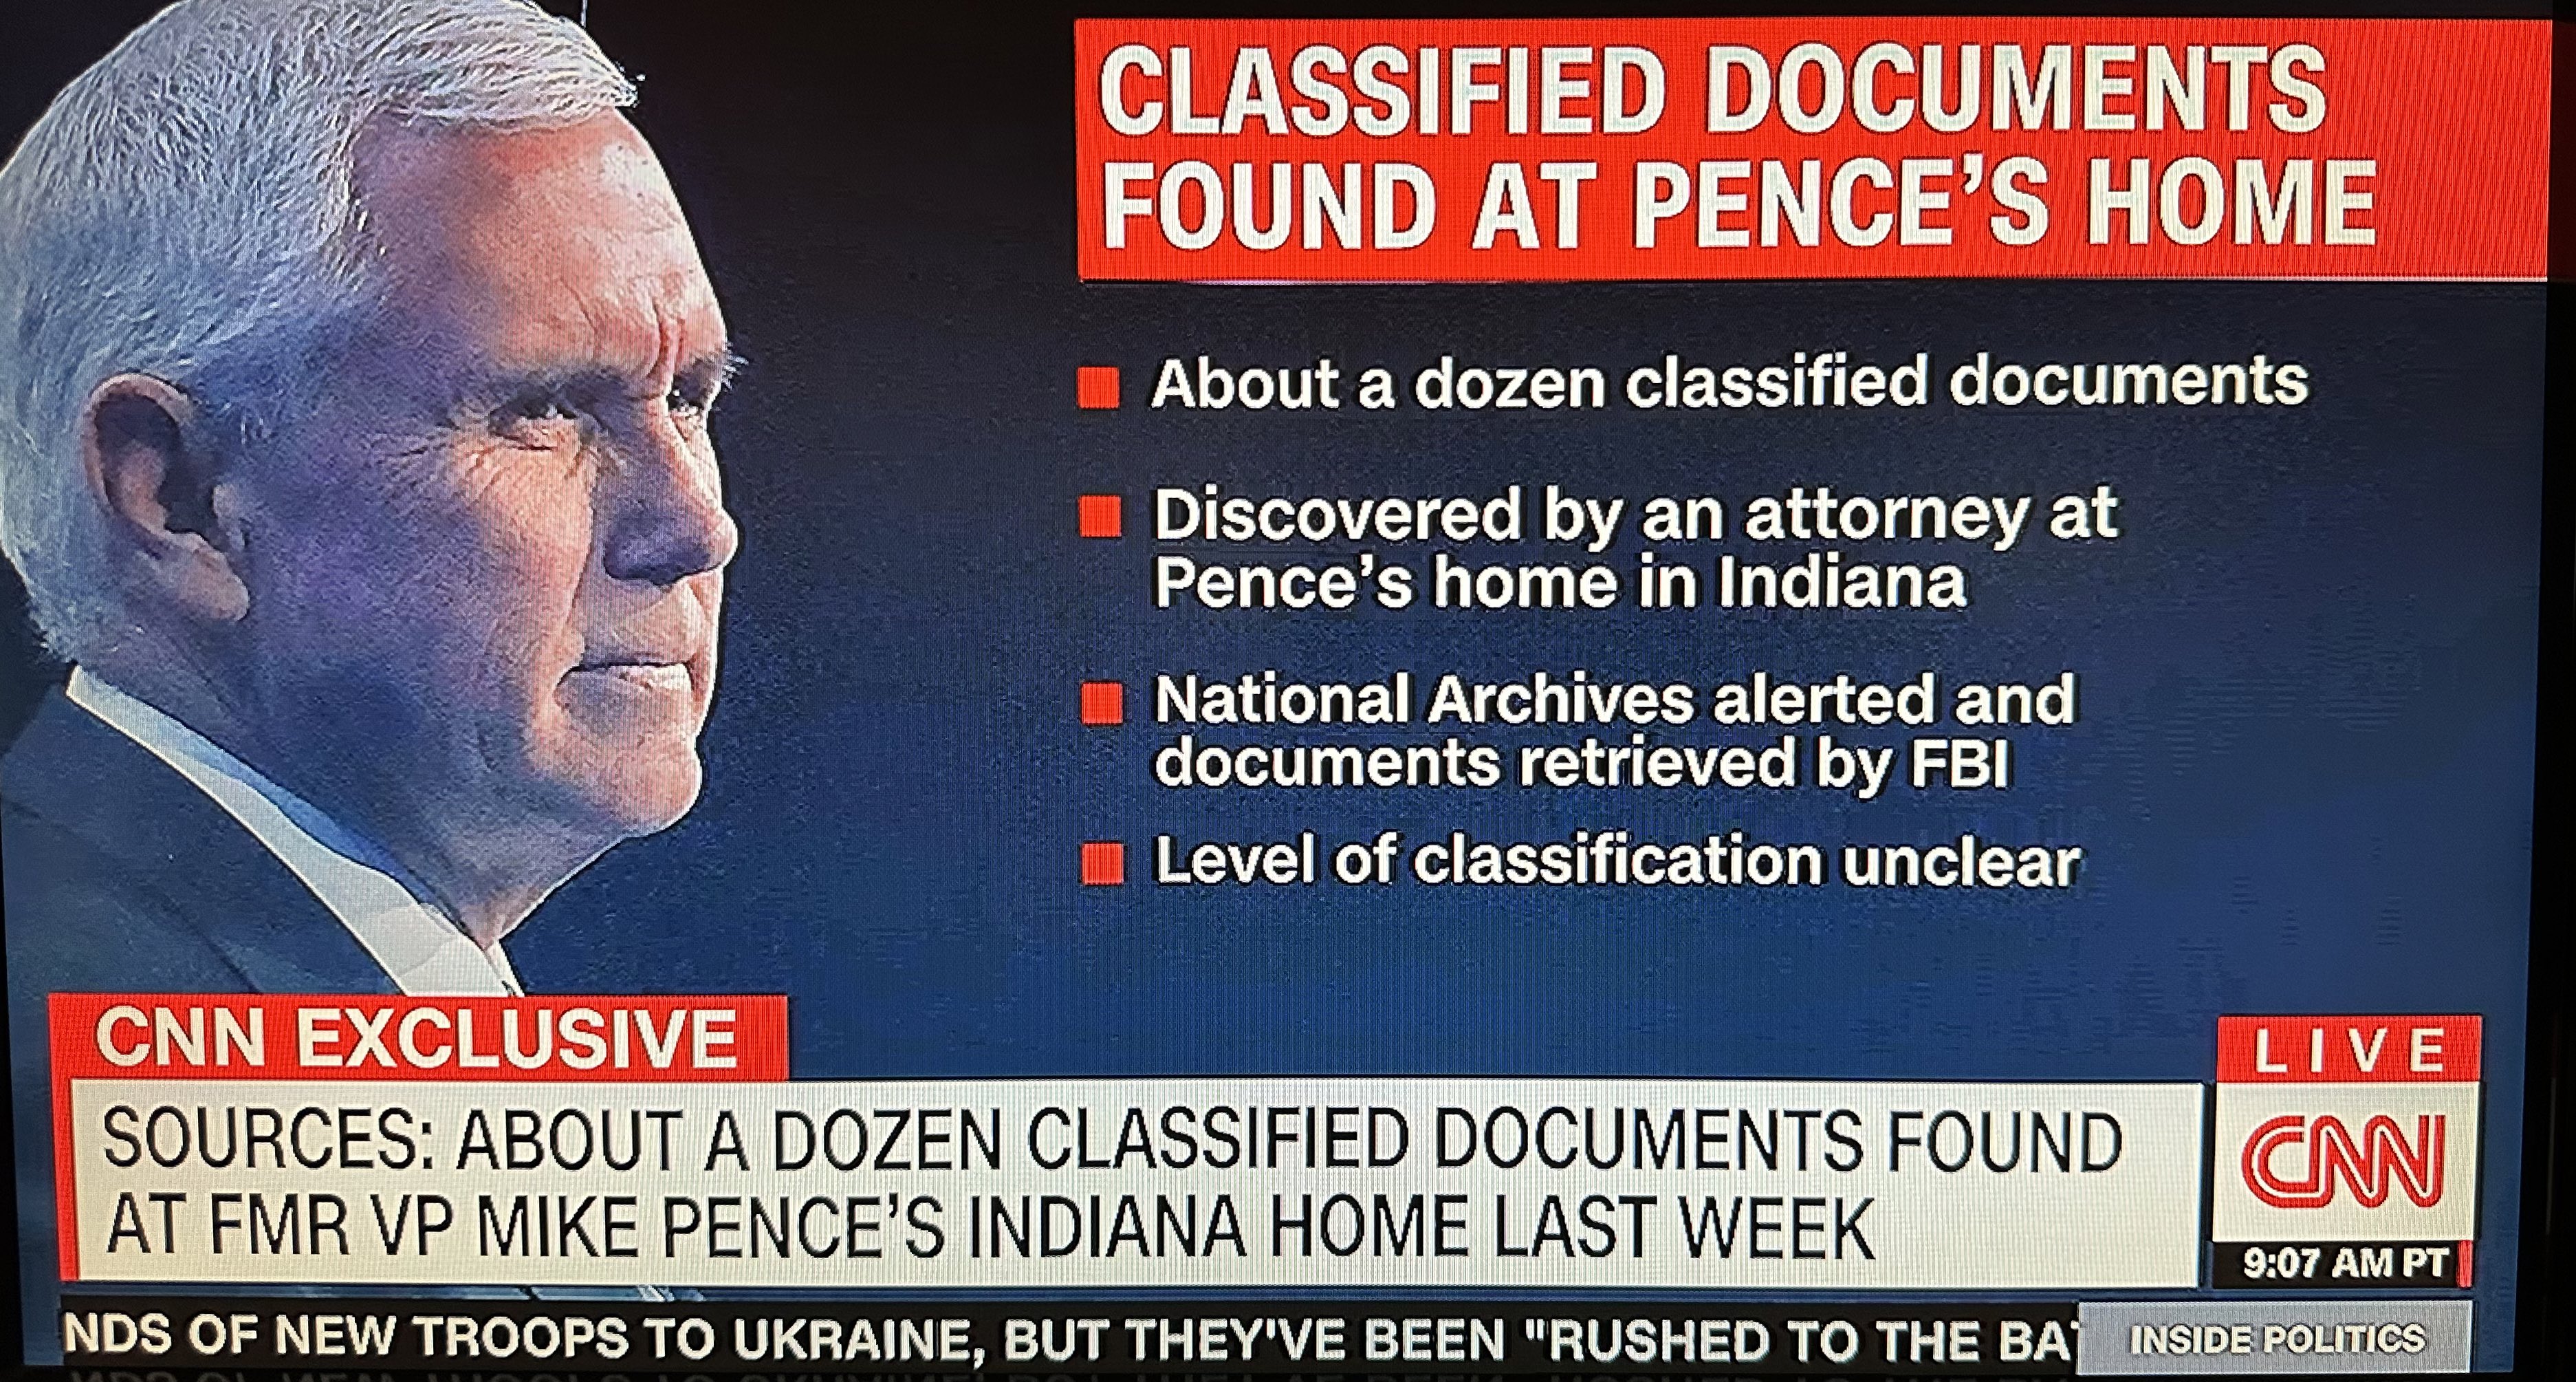 🇺🇦Paula Chertok🗽 on Twitter: "💥Classified documents found at PENCE's  Indiana home, not in a secured location, retrieved by FBI and returned to  National Archives, CNN reports https://t.co/uo0fAQpFeD" / Twitter